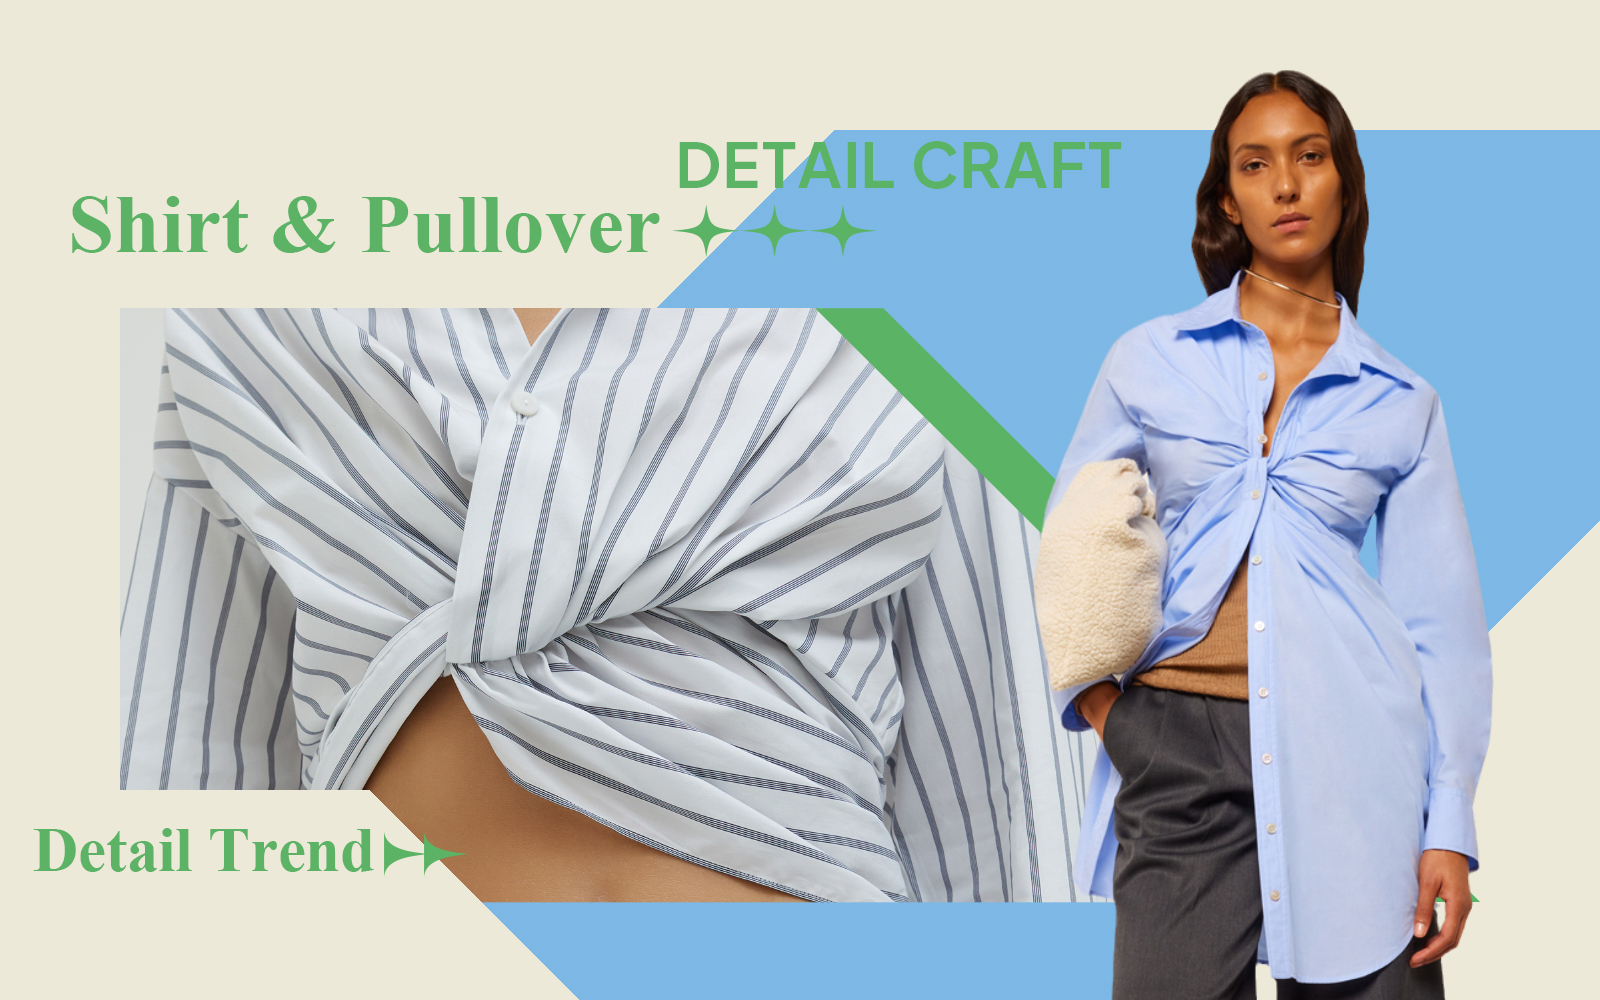 The Detail & Craft Trend for Shirt & Pullover